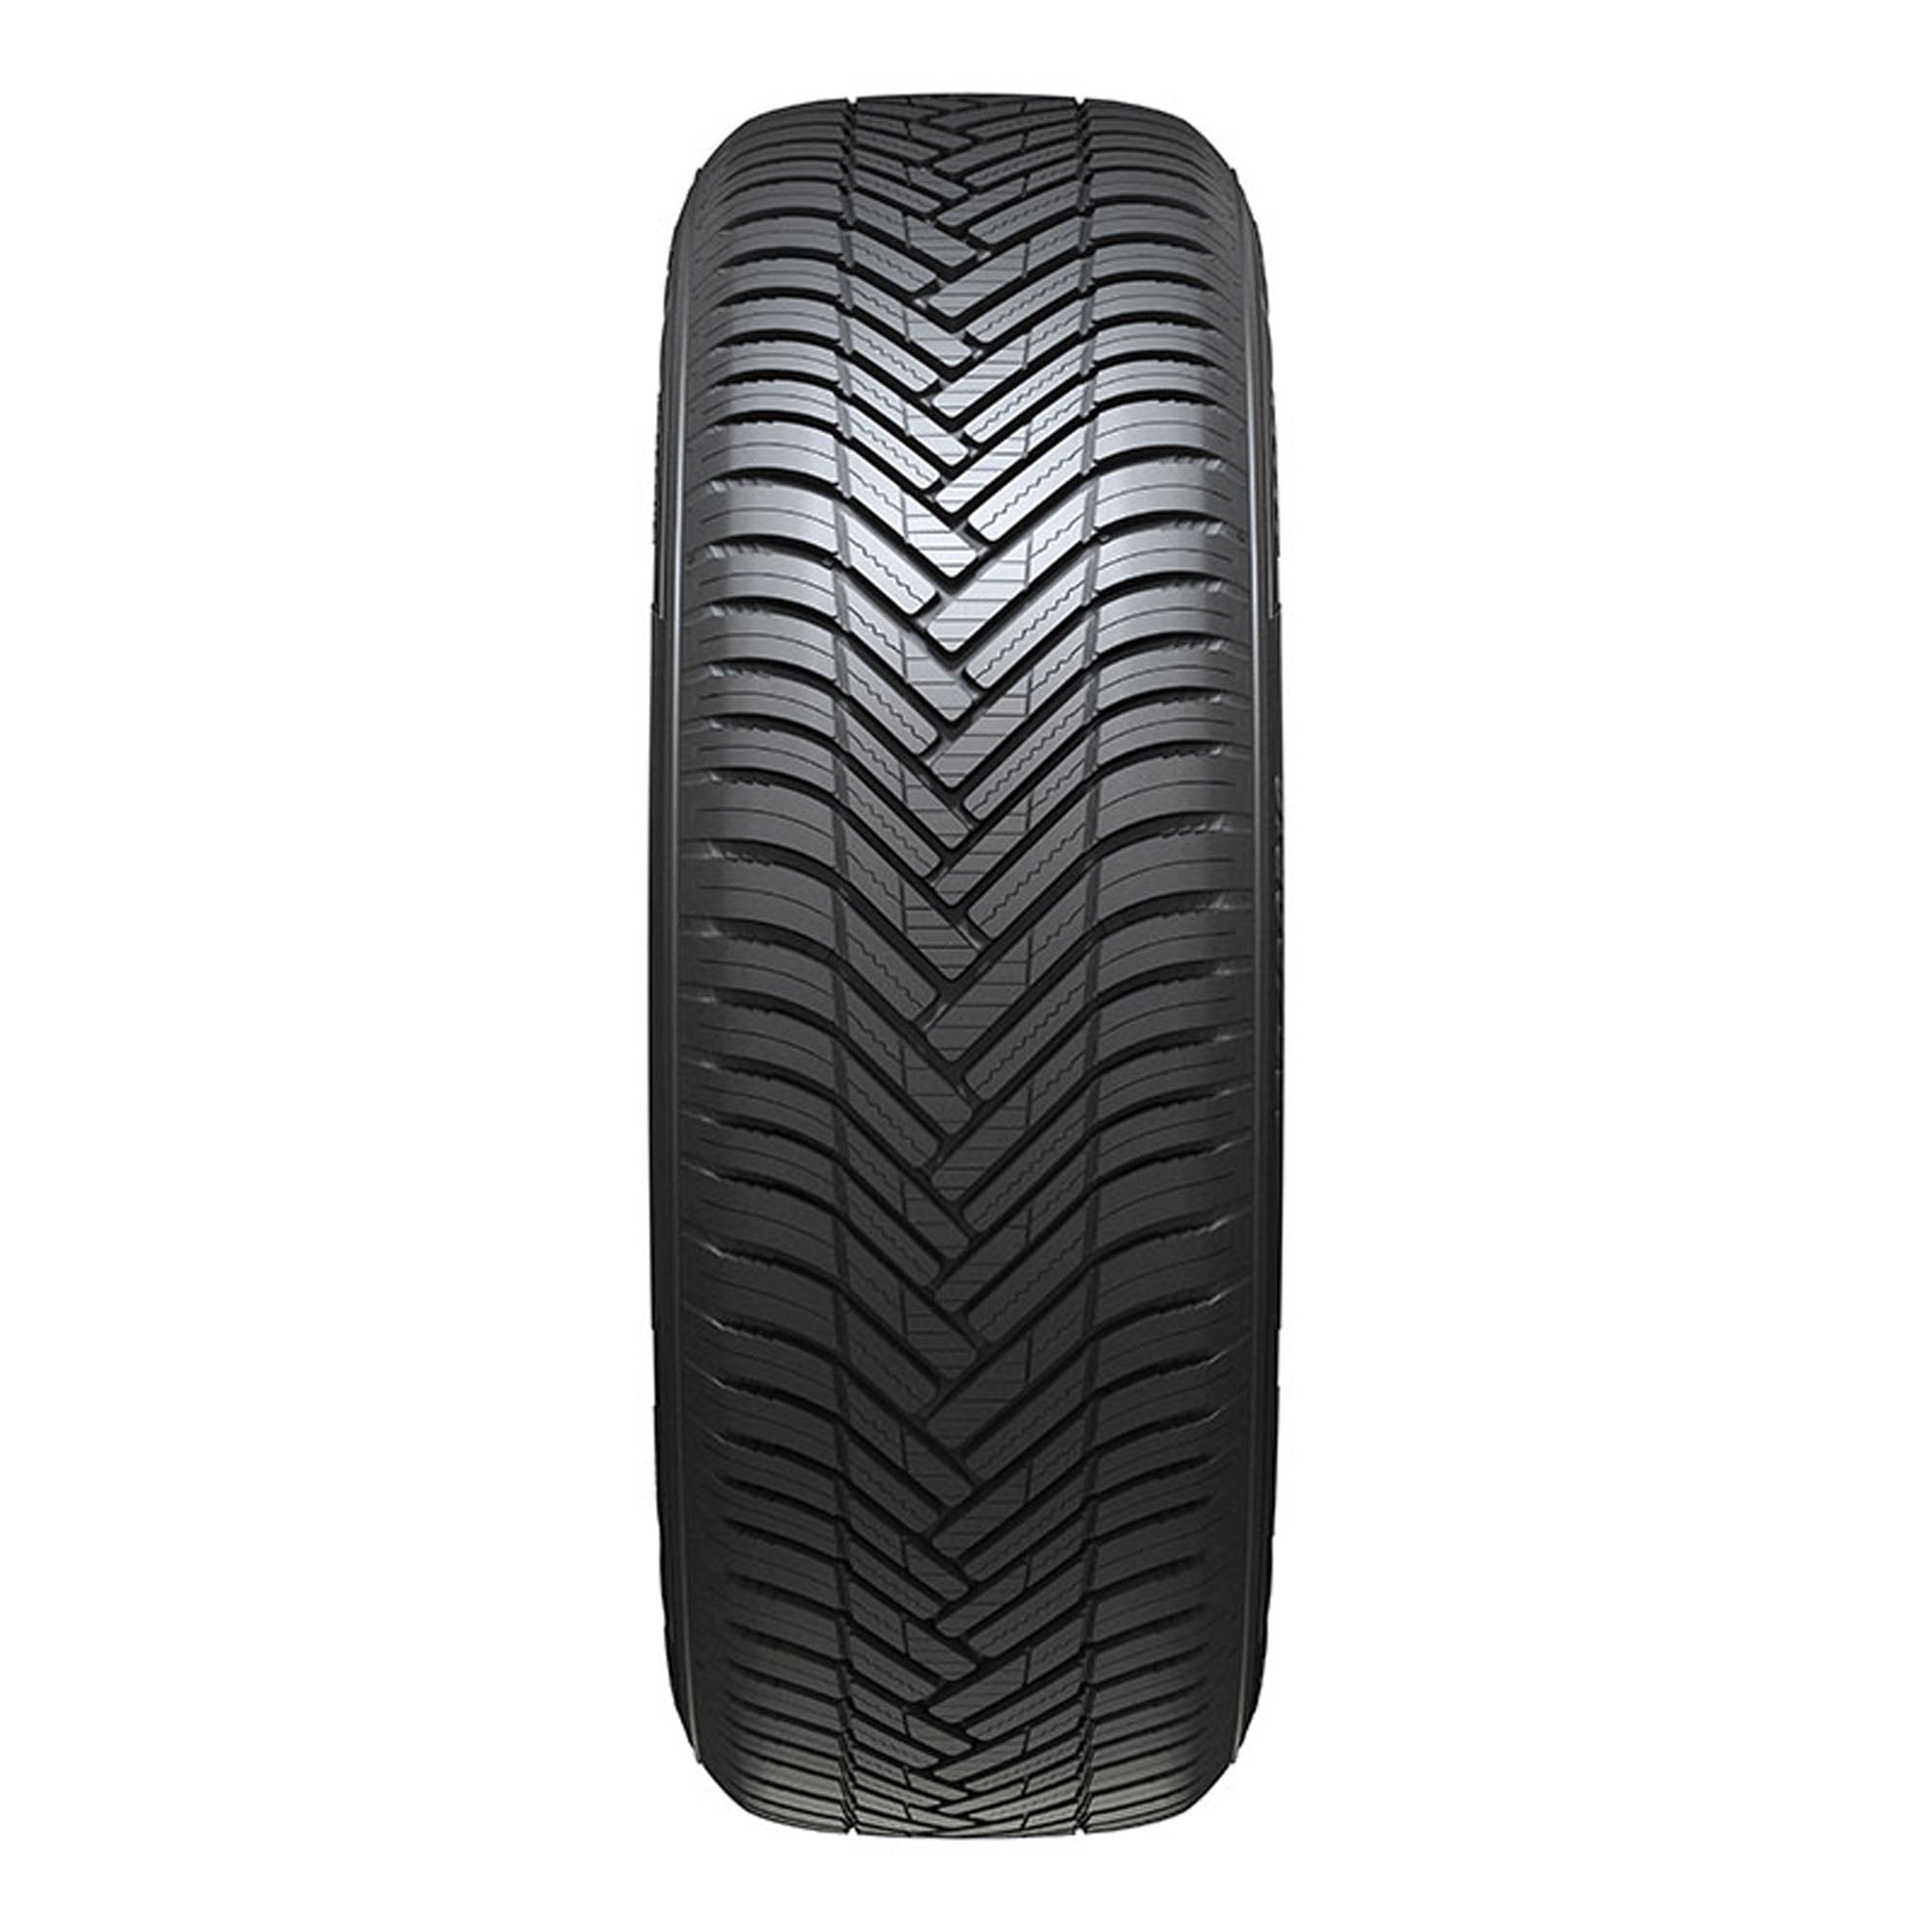 Hankook Kinergy 4S2 X (H750A) All Weather 225/60R17 99H SUV/Crossover Tire